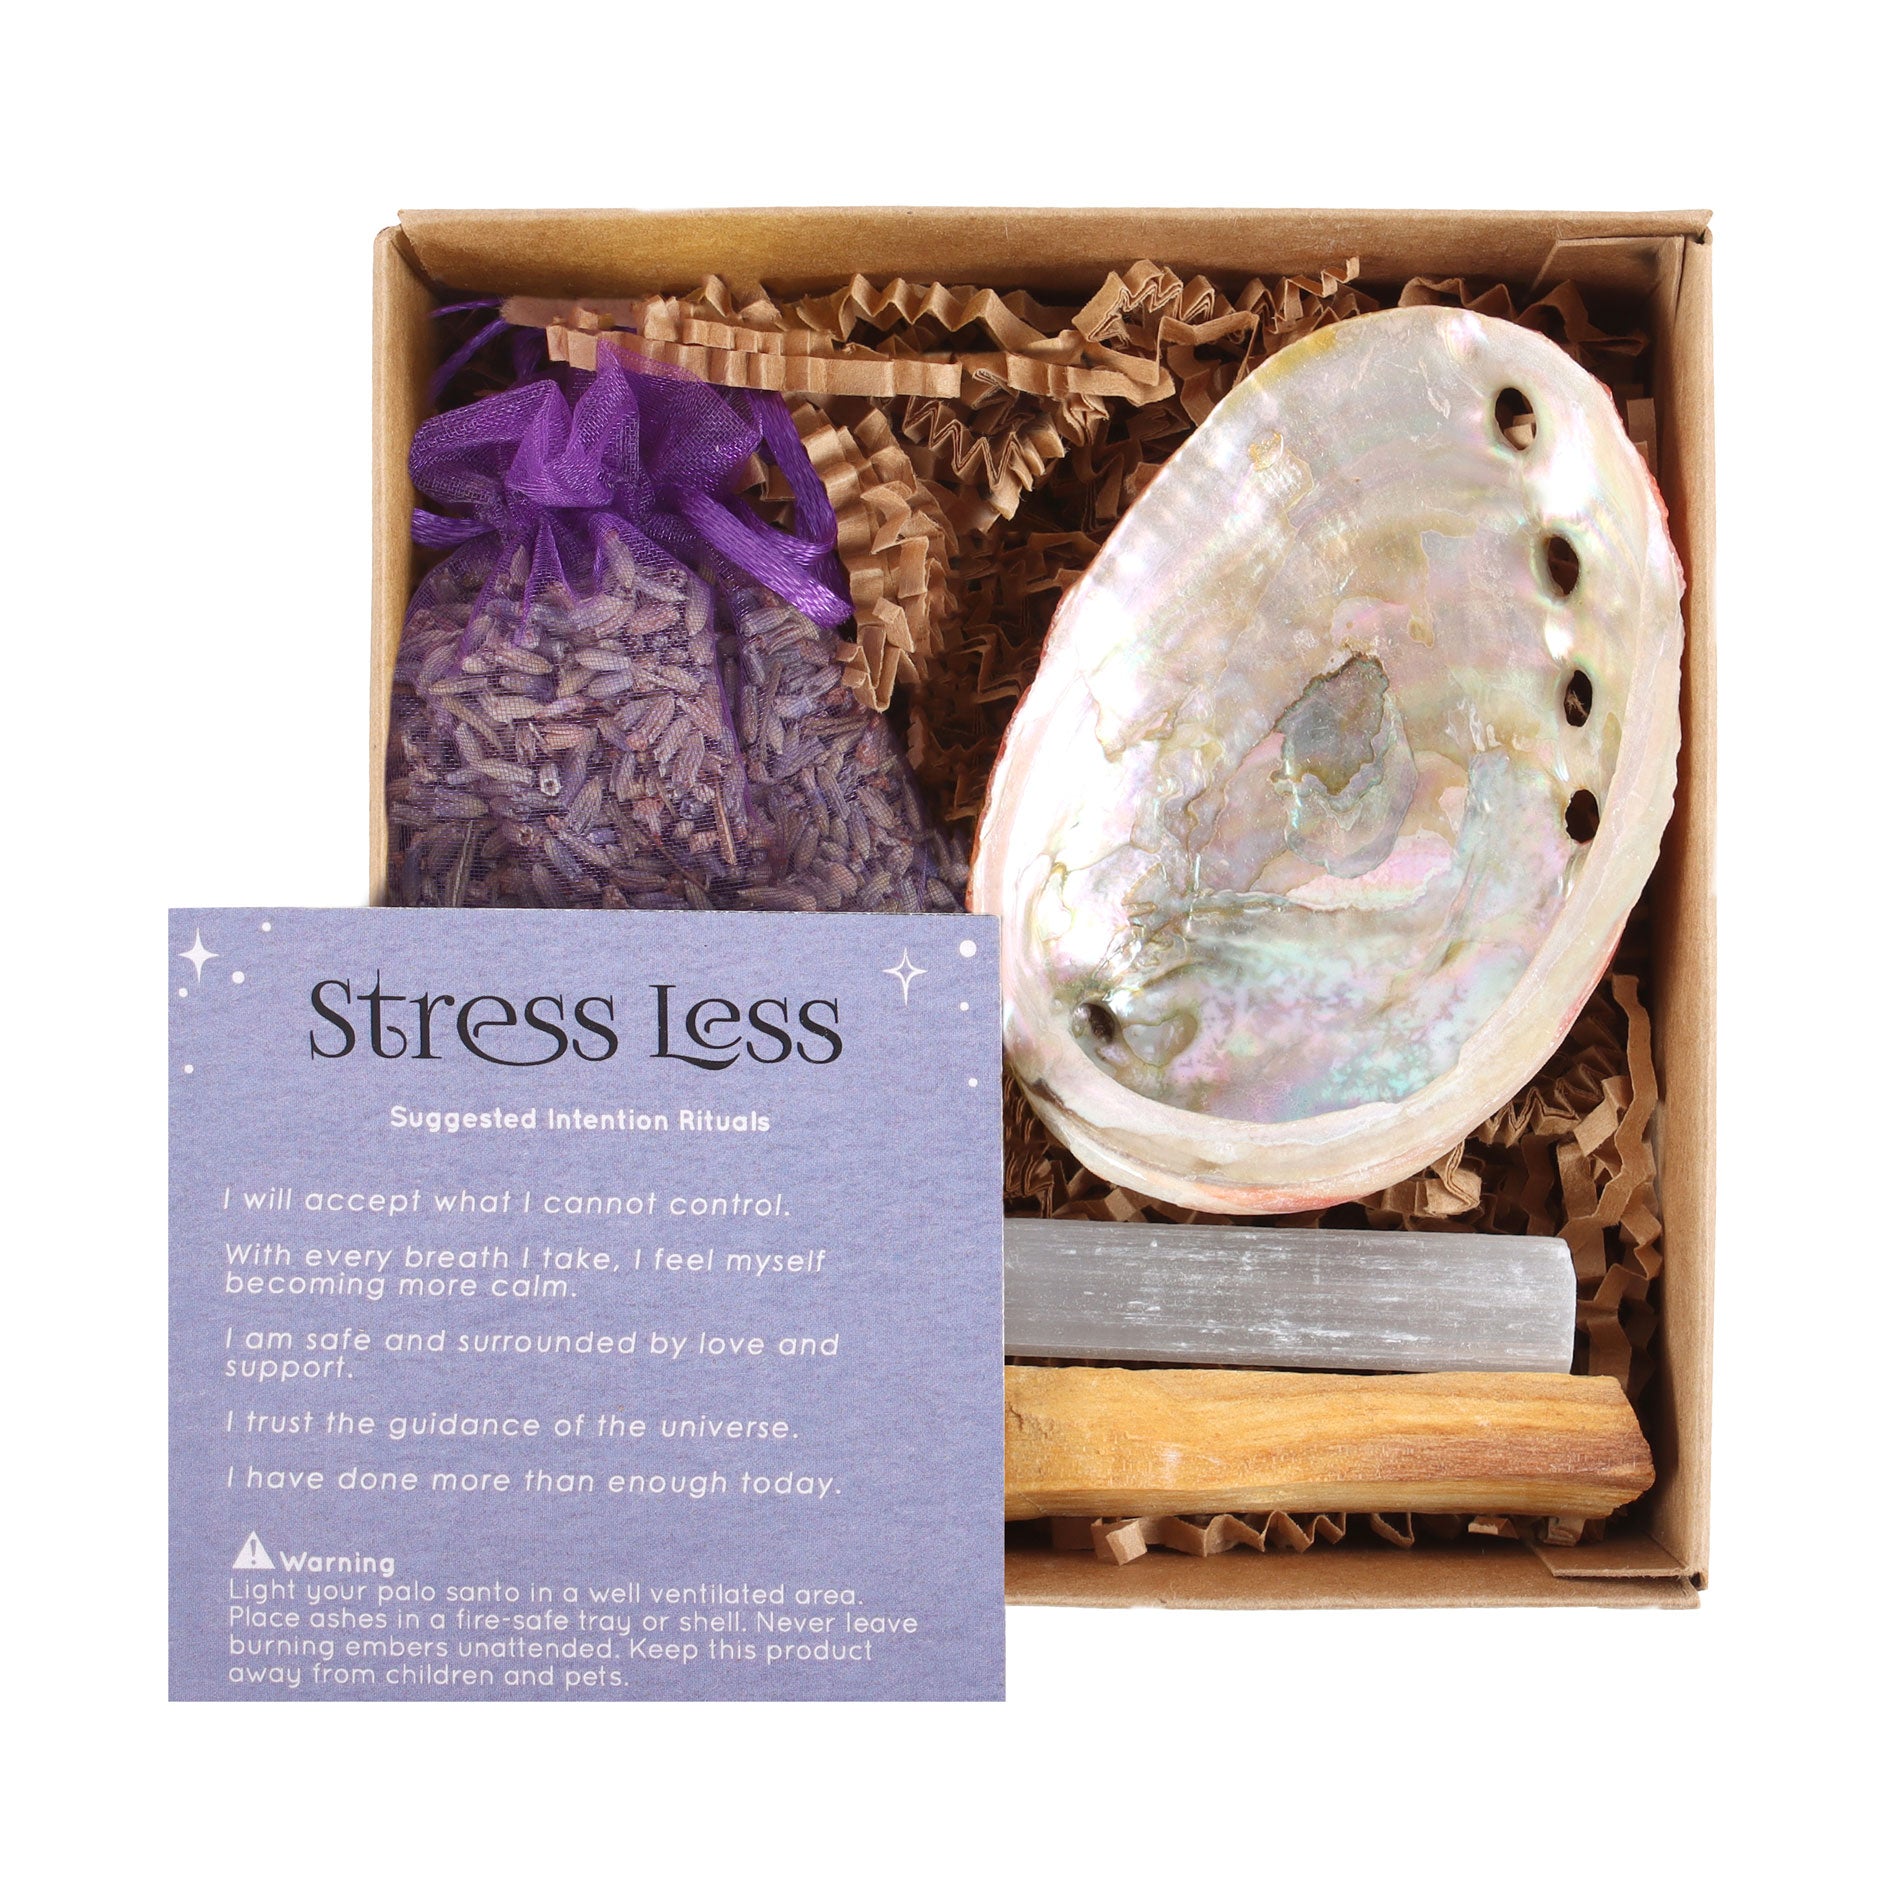 View Herbal Magick Stress Less Spell Kit information